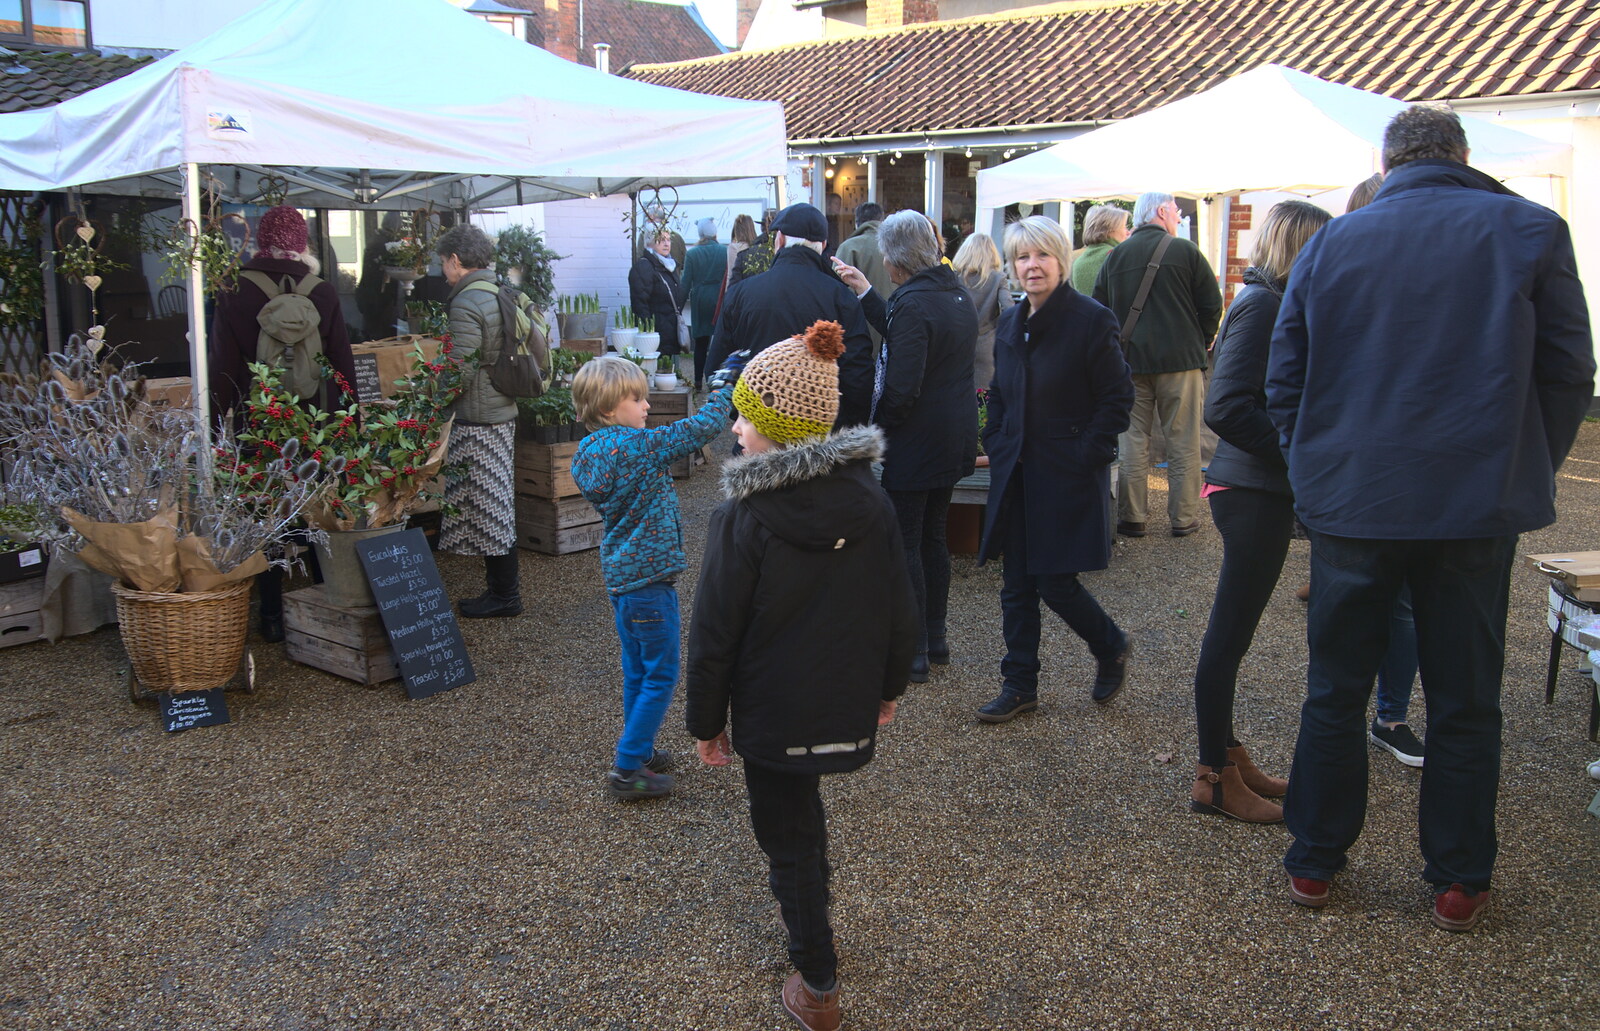 We have a poke around Cobb's Yard from The St. Nicholas Street Fayre, Diss, Norfolk - 9th December 2018